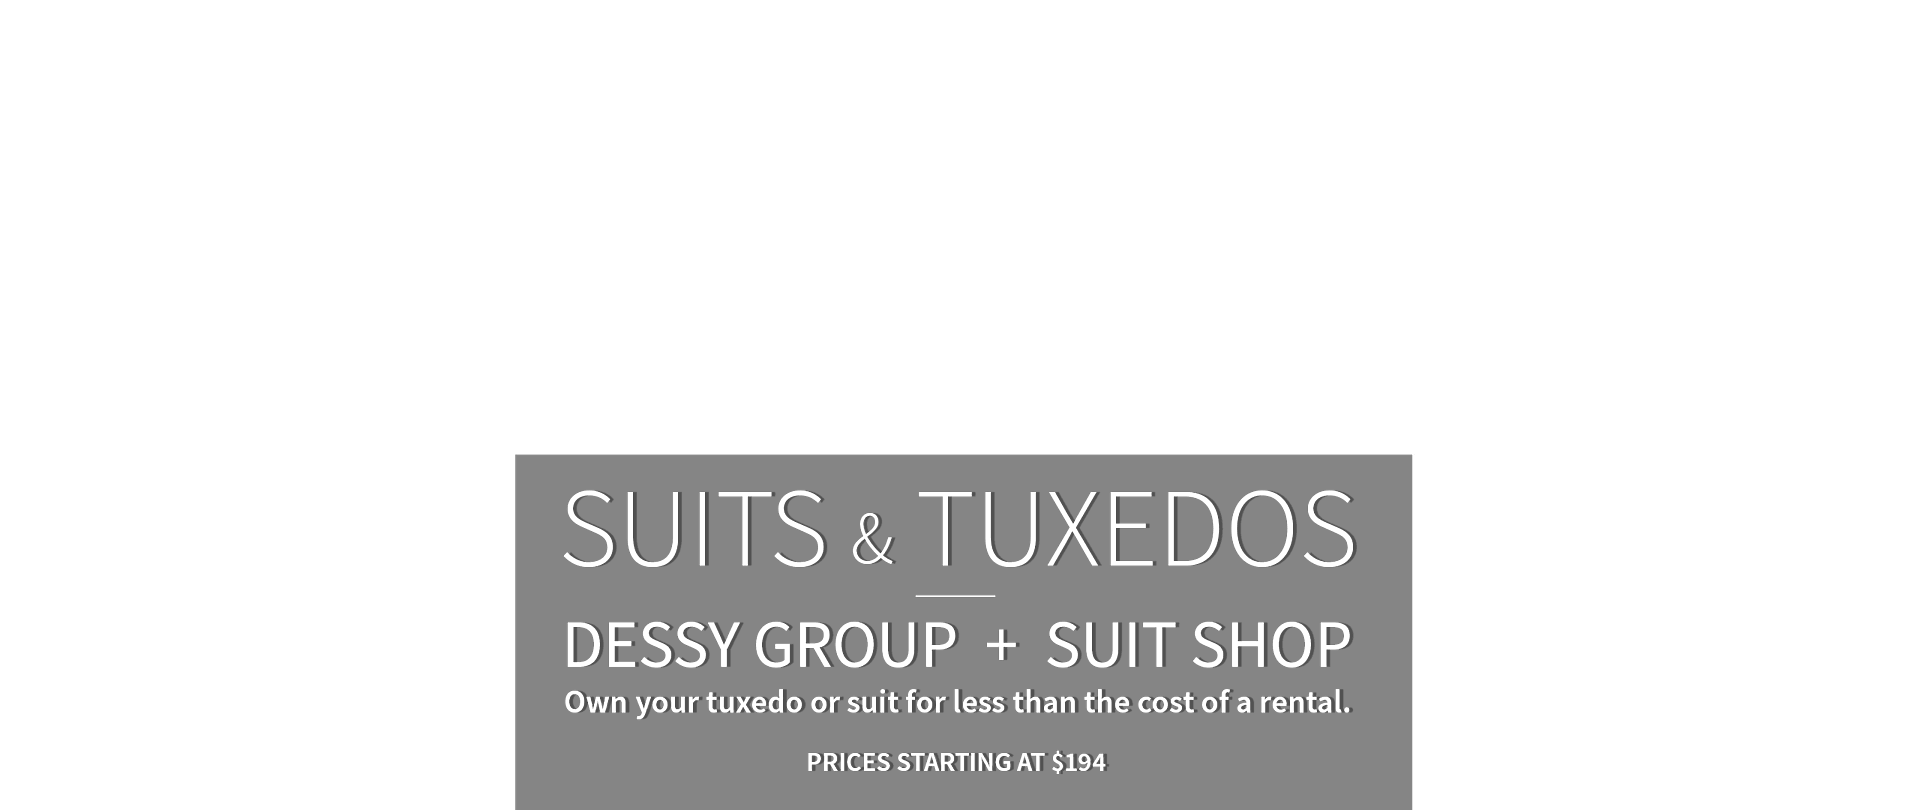 Own your tuxedo or suit for less than the cost of a rental. Prices starting at $194.